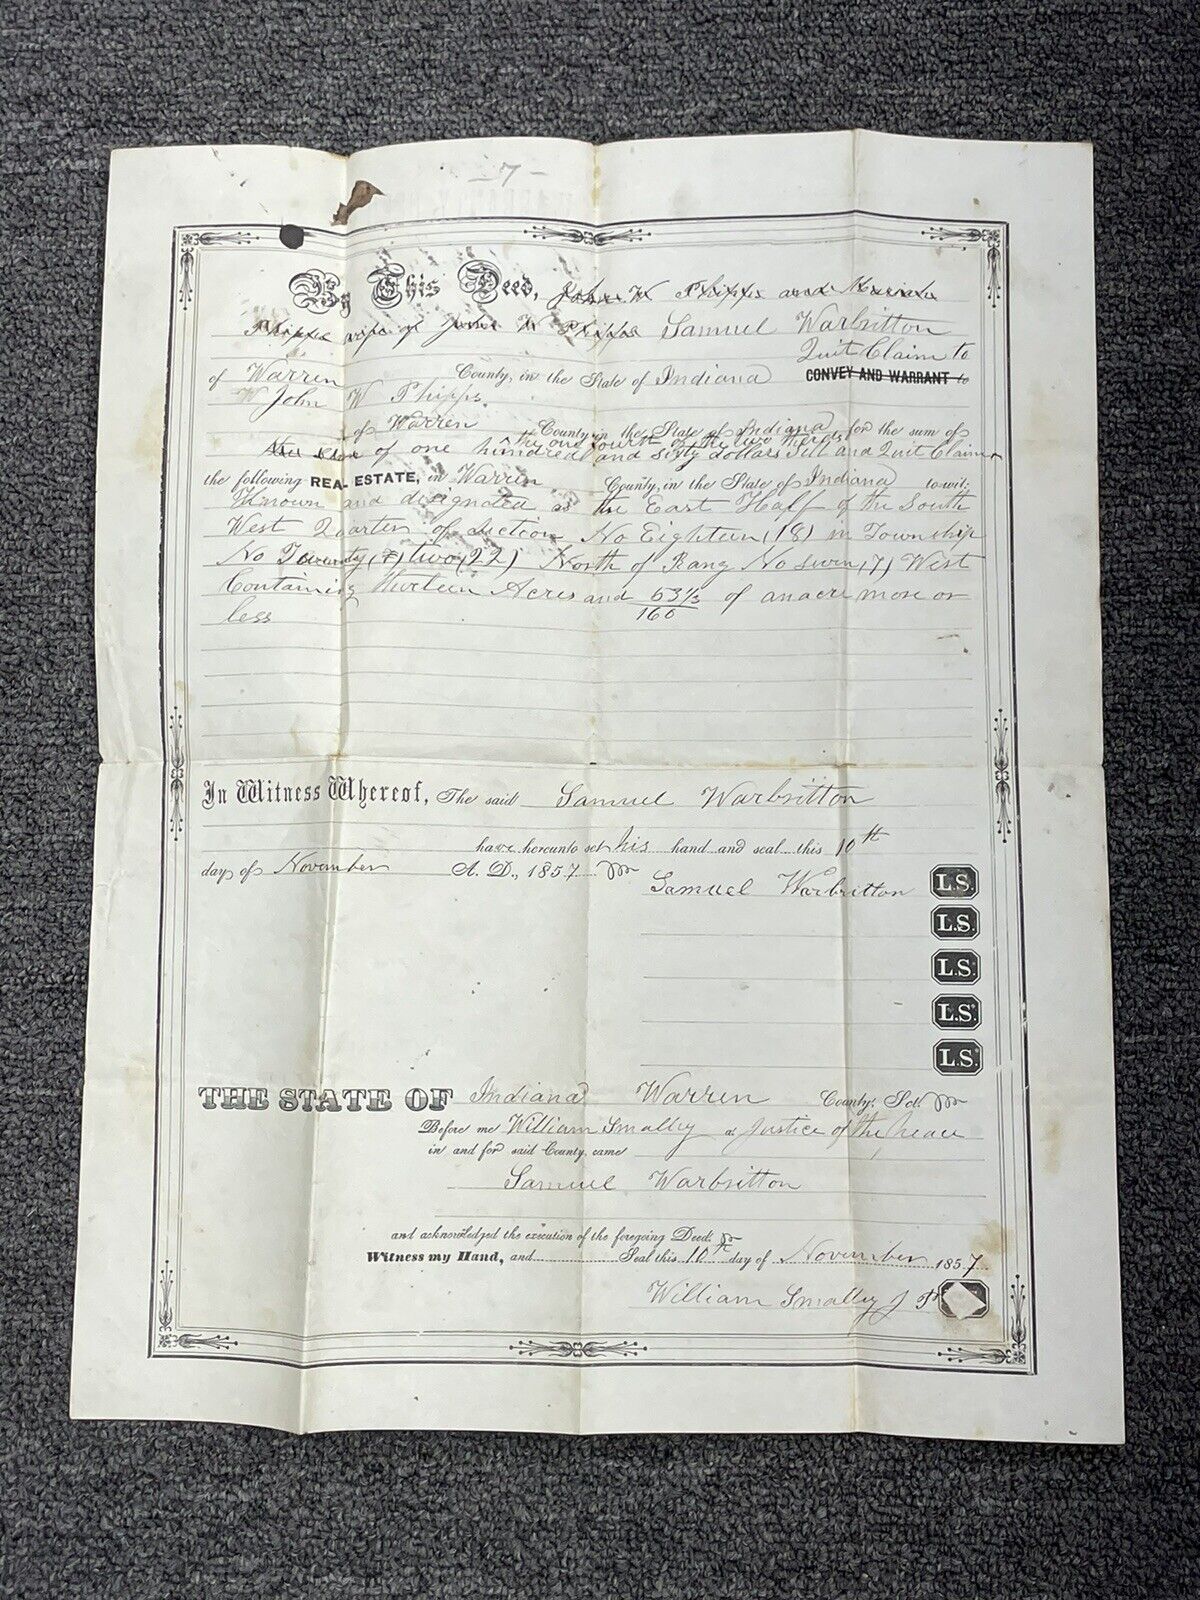 Antique 1857 Warranty Deed From Warren County Indiana Real Estate Contract